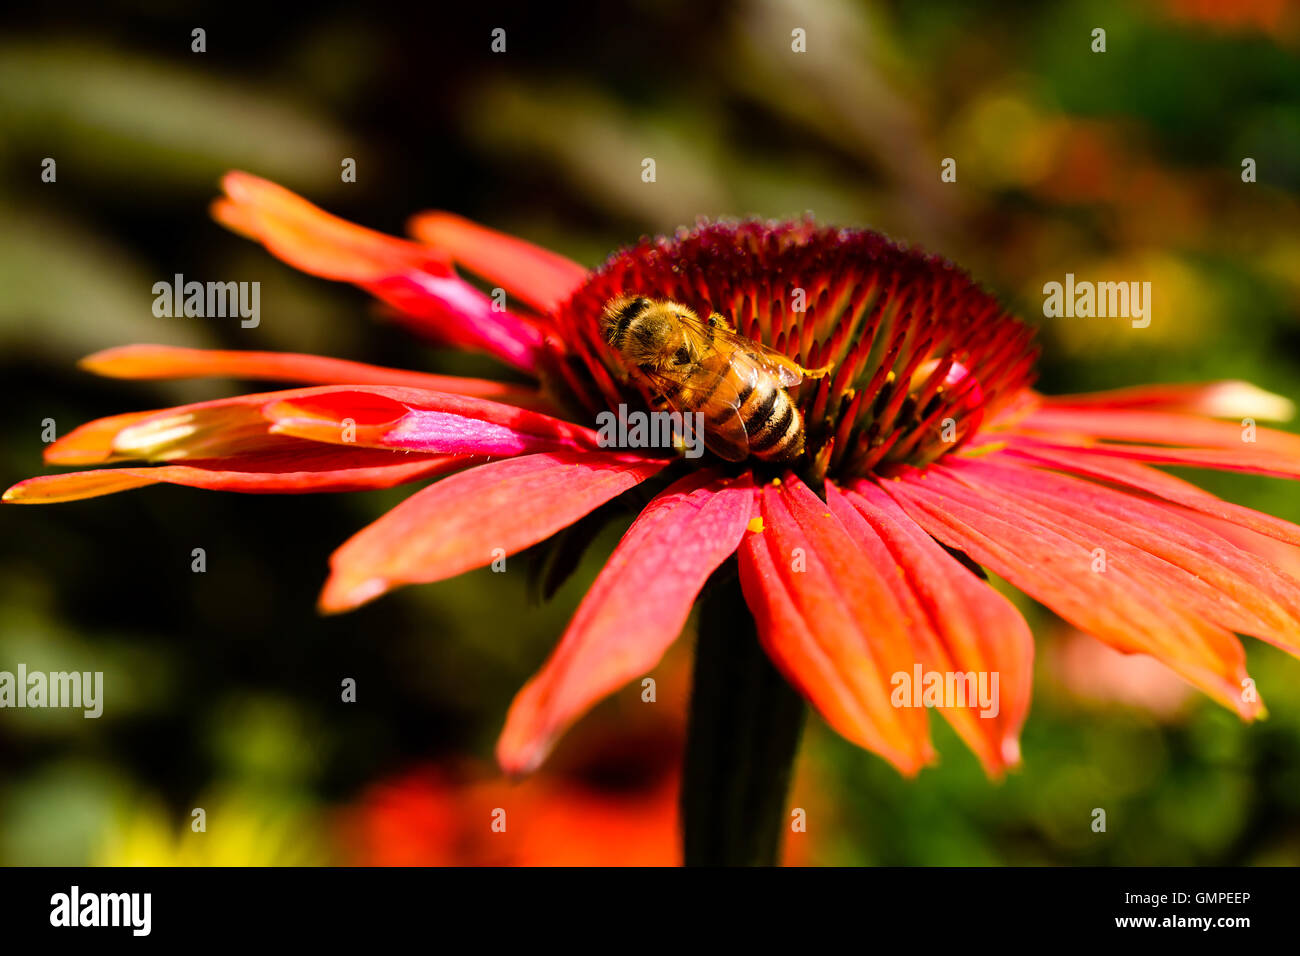 Close up of female honeybee feeding on nectar from a red coneflower while pollinating it. Stock Photo